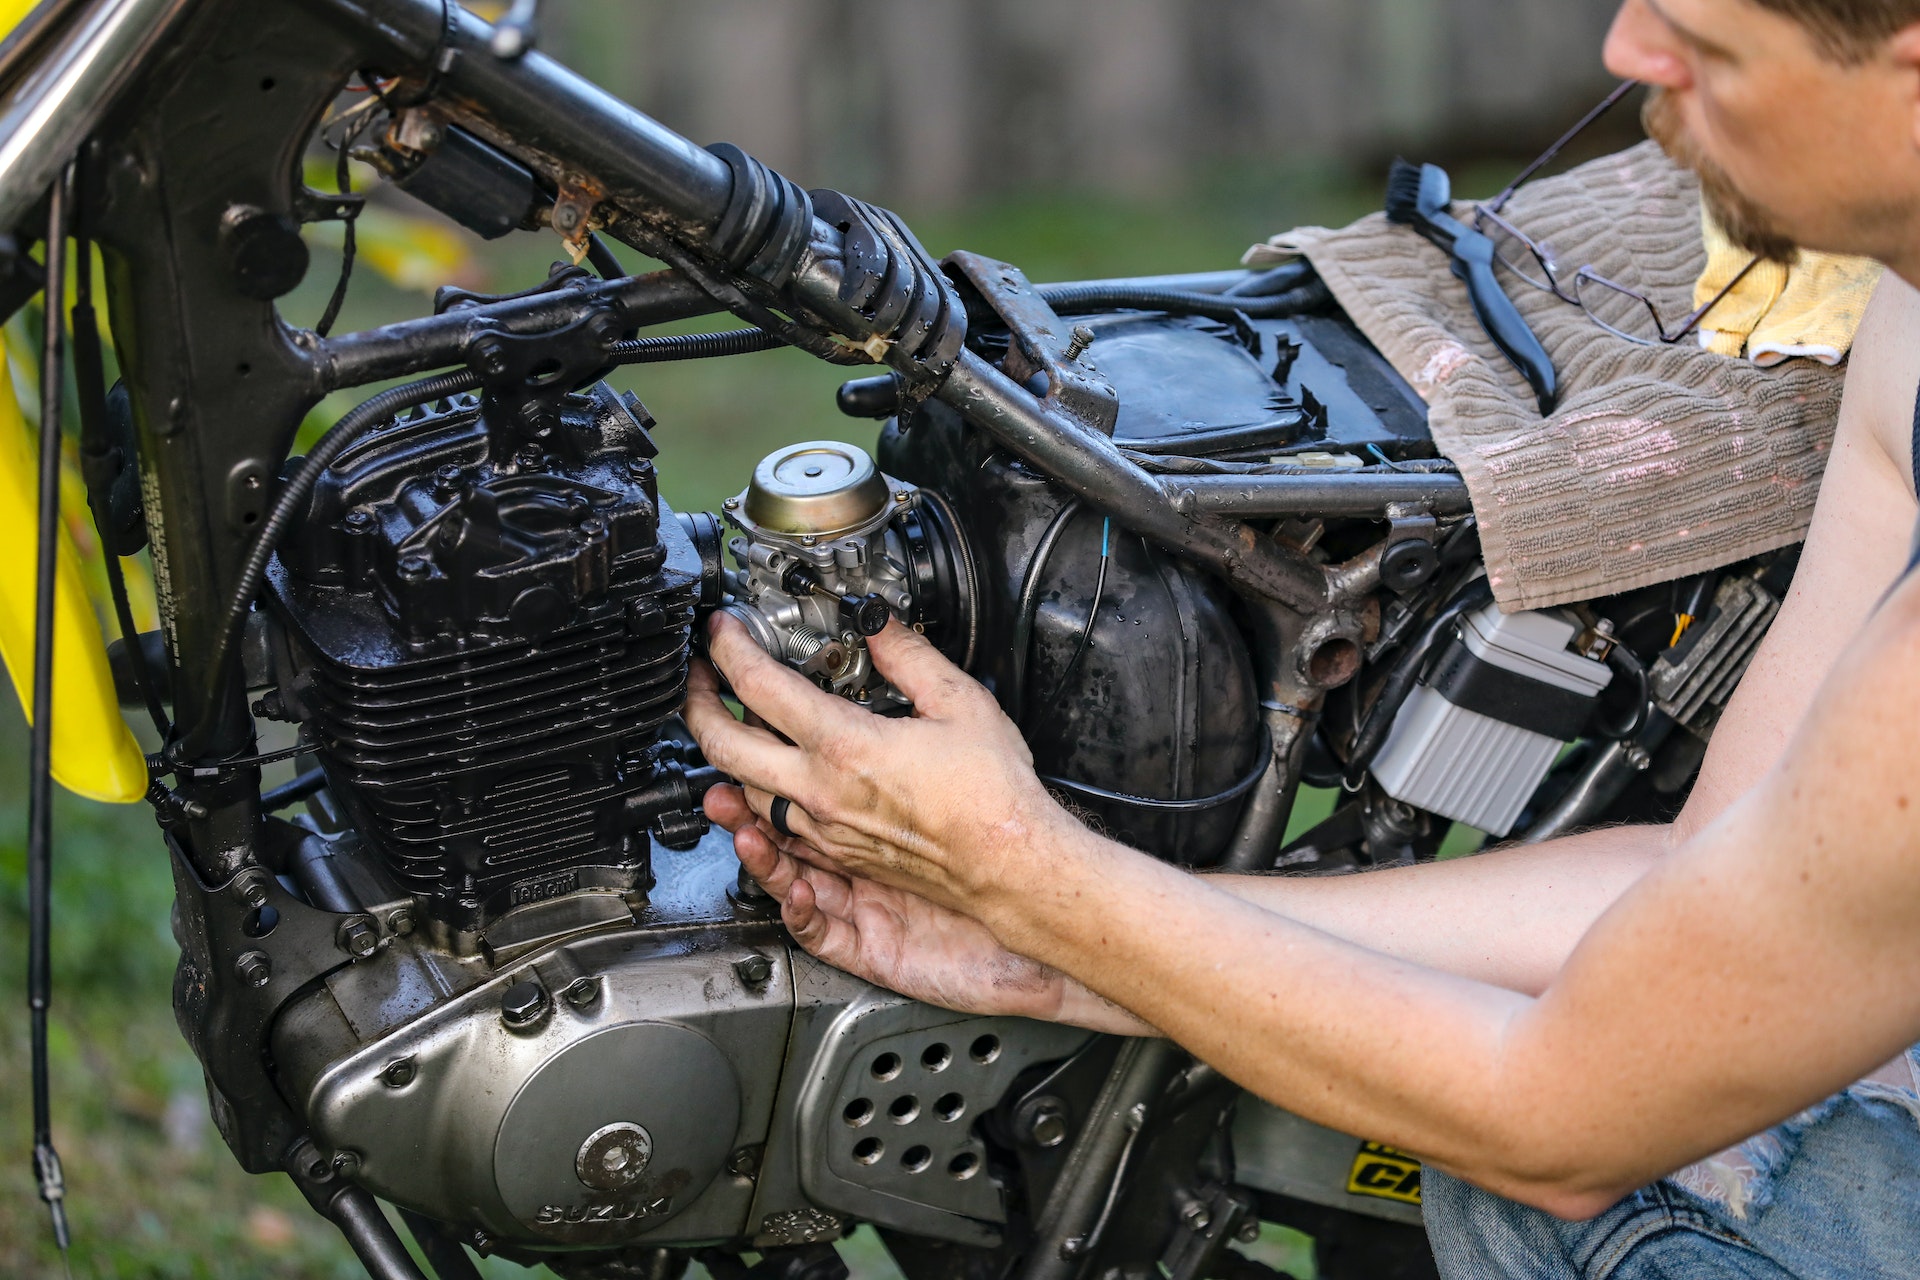 A man fixing motorcycle engine